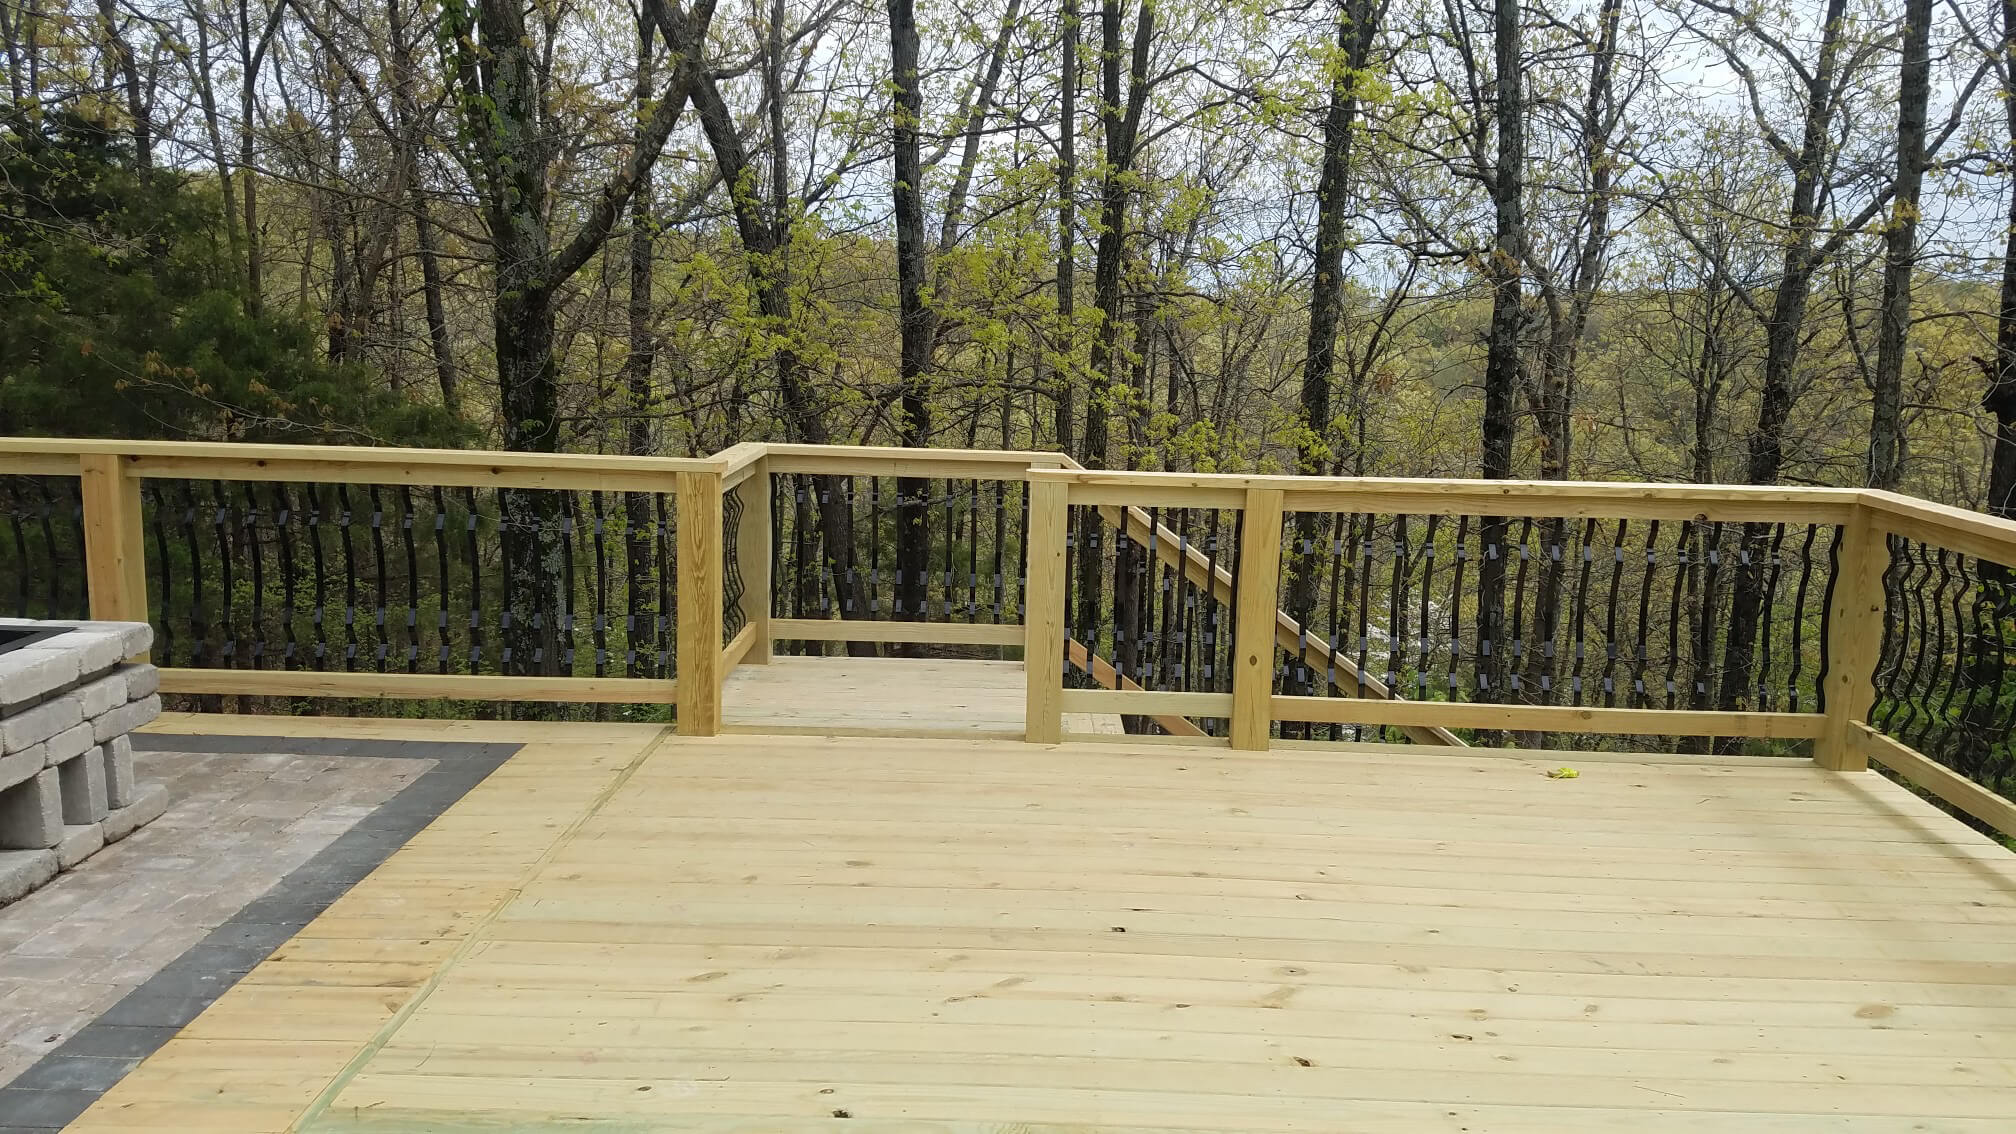 New deck on residential property before staining